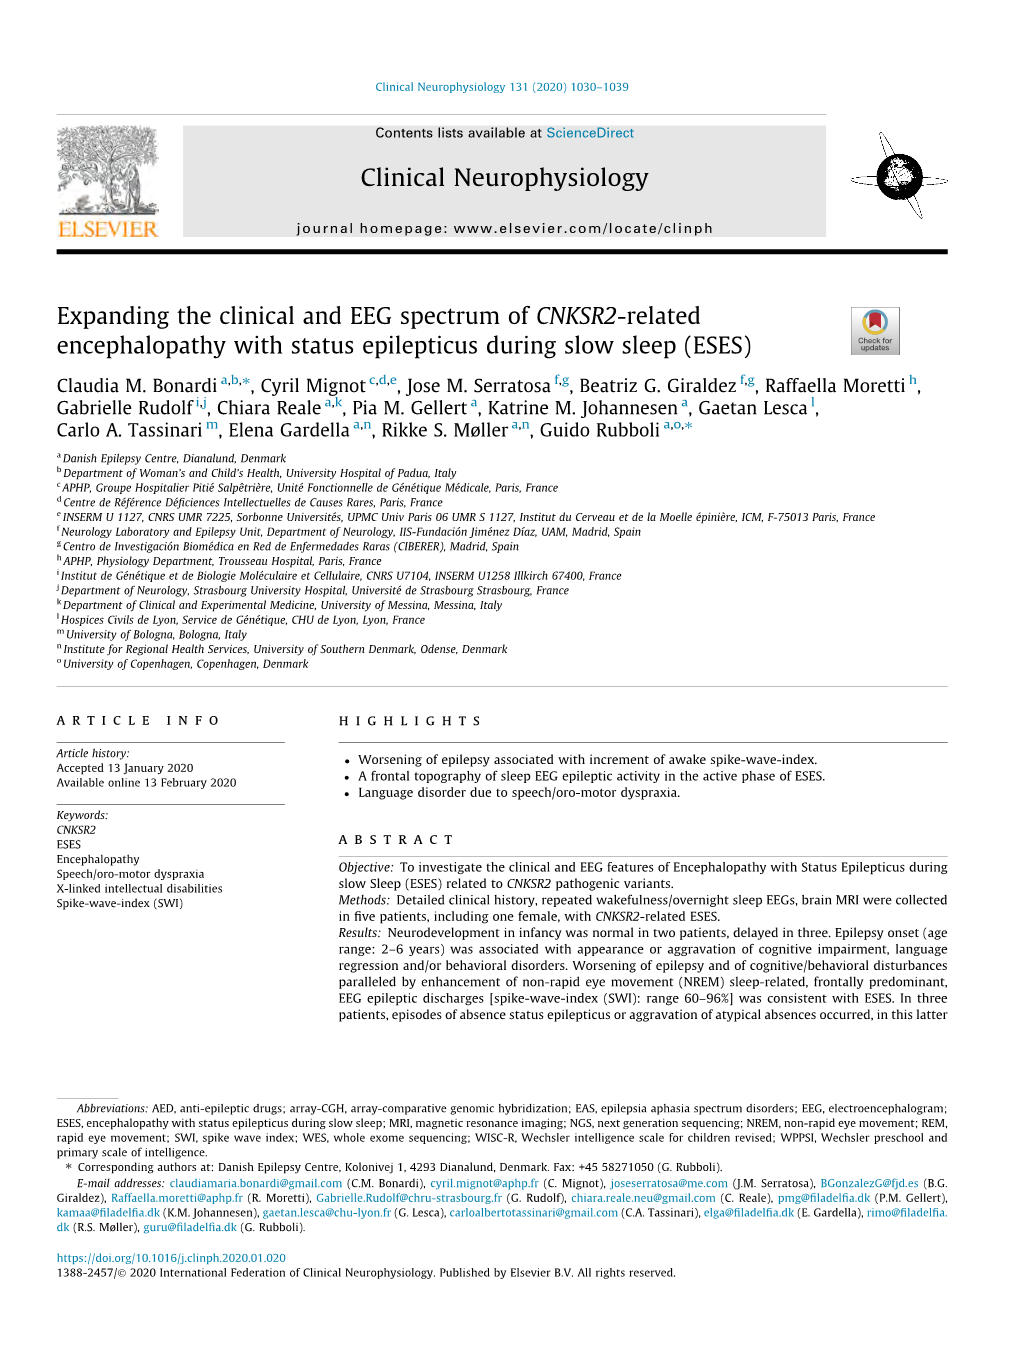 Expanding the Clinical and EEG Spectrum of CNKSR2-Related Encephalopathy with Status Epilepticus During Slow Sleep (ESES) ⇑ Claudia M